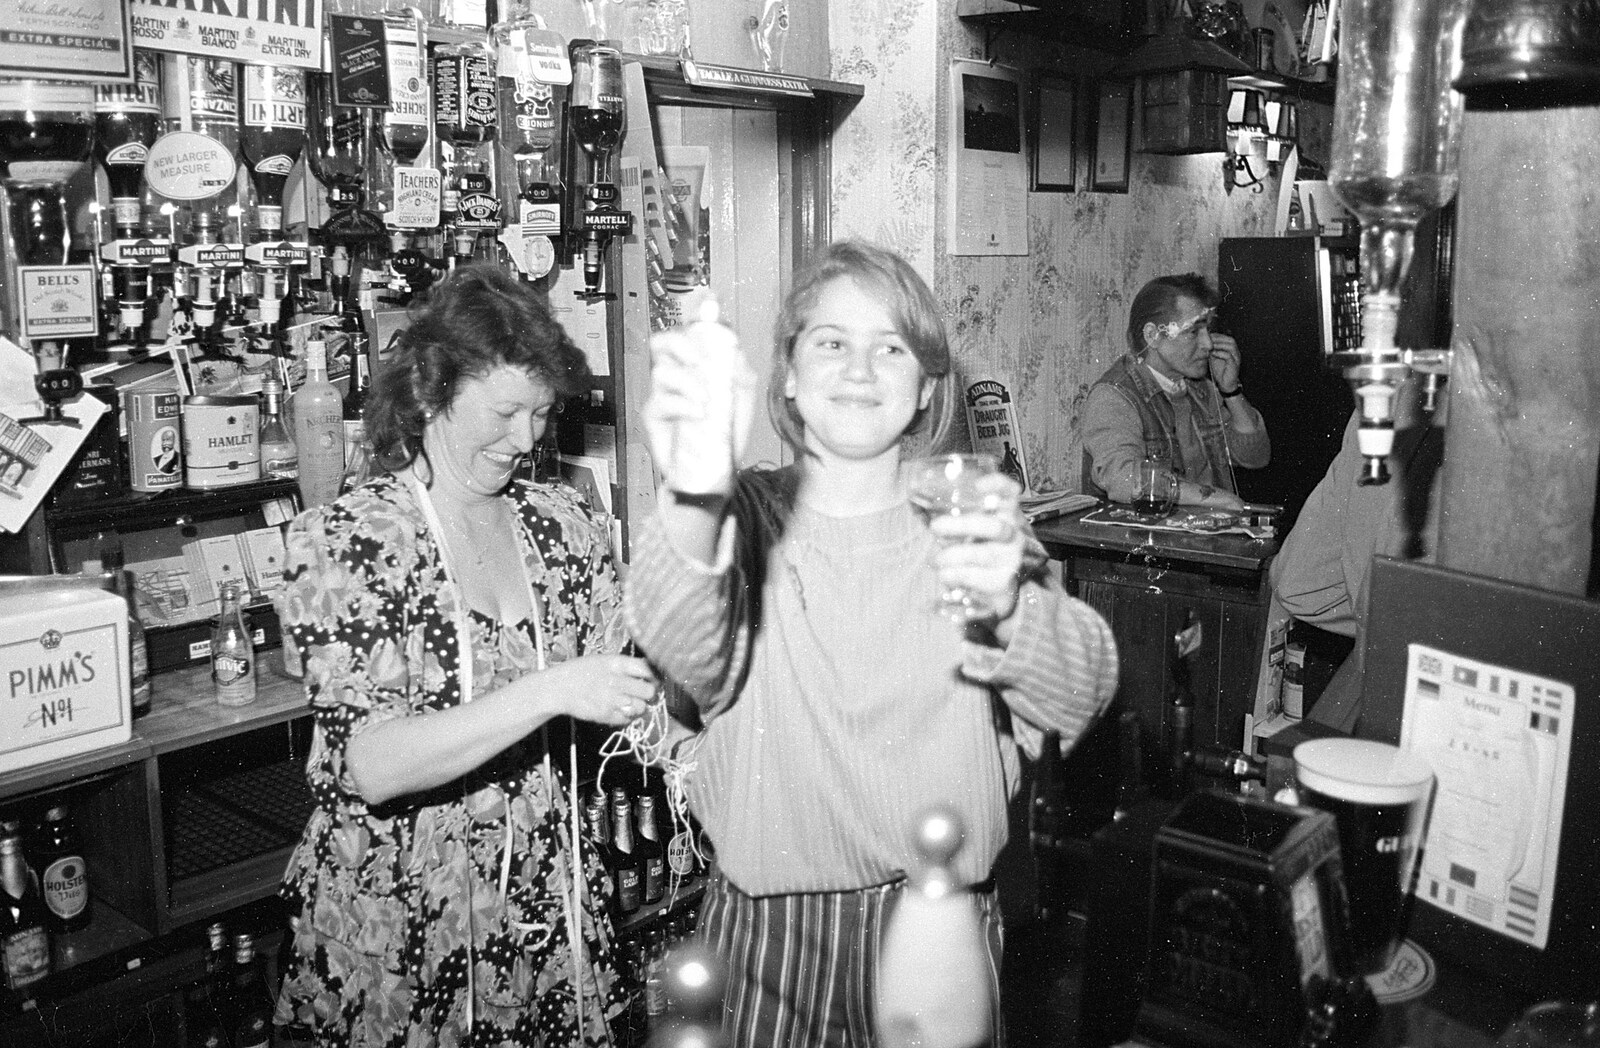 Lorraine gets ready with silly string from New Year's Eve at the Swan Inn, Brome, Suffolk - 31st December 1992